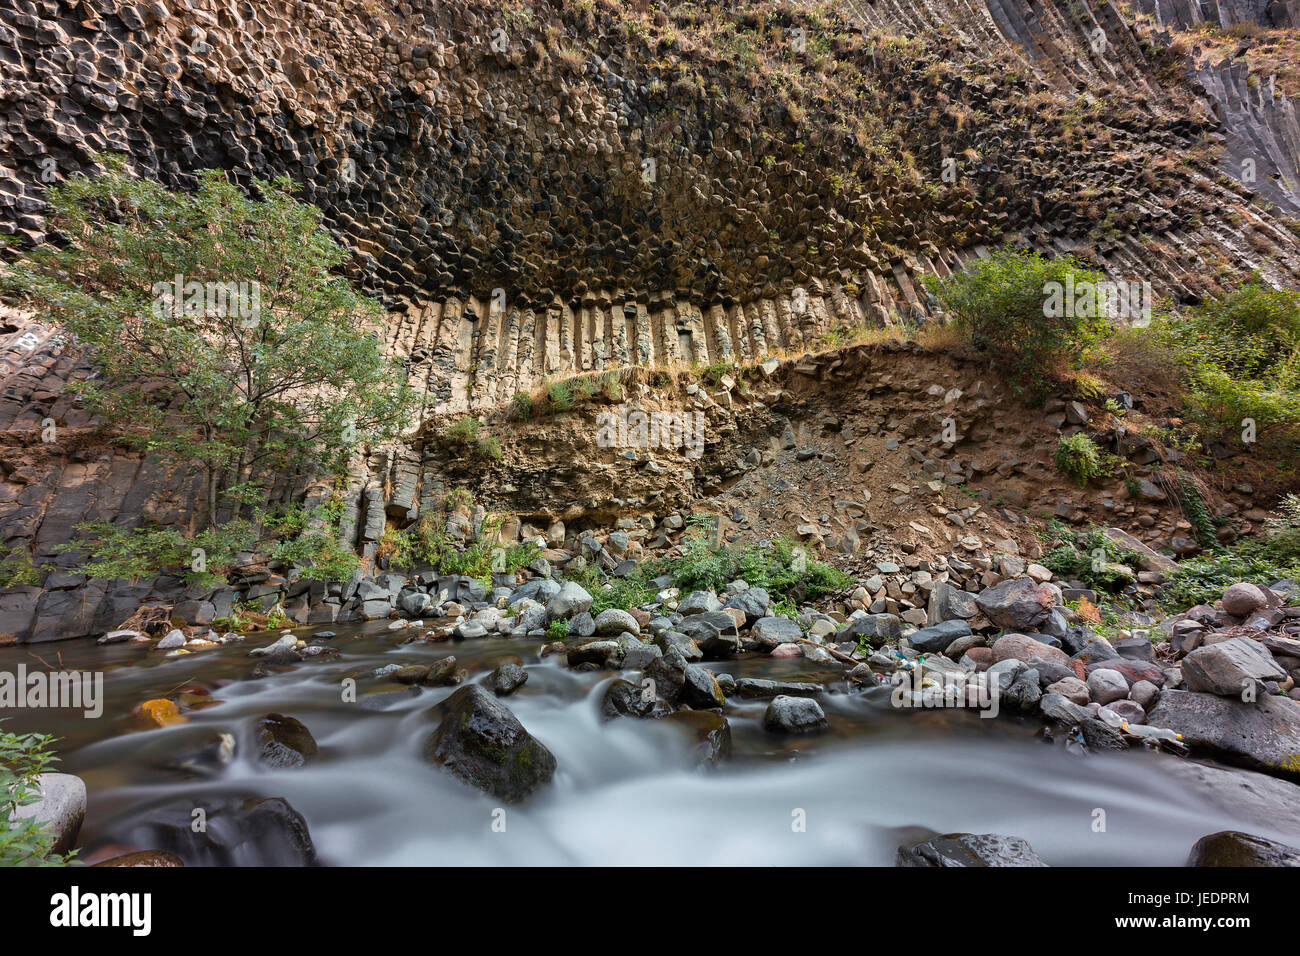 Basalt rock formations known as Symphony of Stones in Armenia. Stock Photo